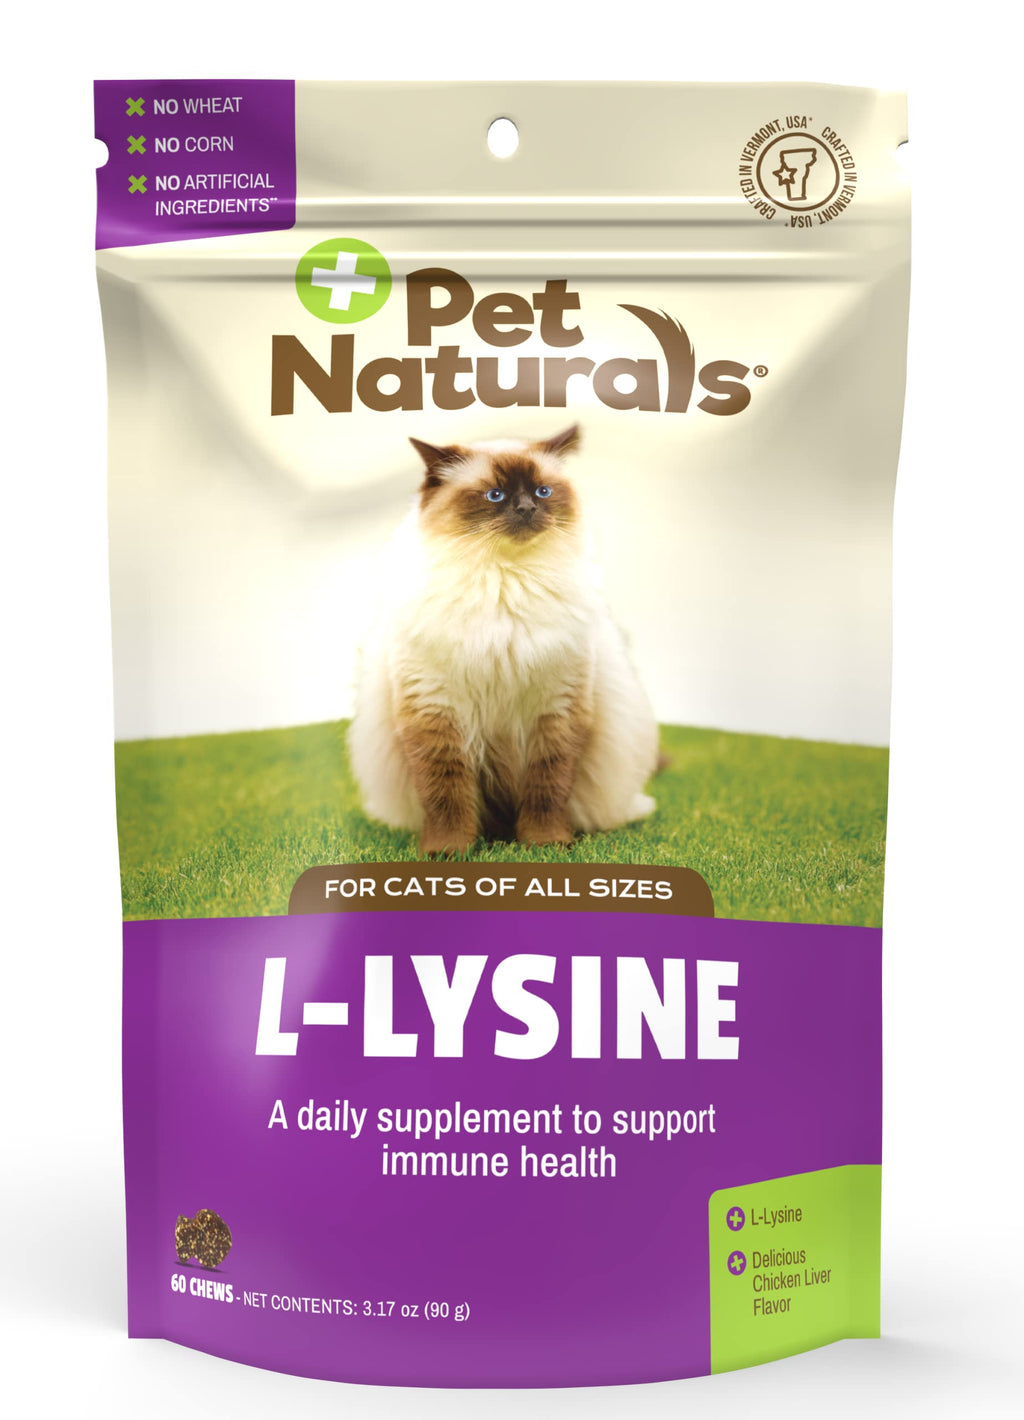 Pet Naturals Lysine for Cats, Chicken Flavor, 60 Chews - Immune and Respiratory Support for Cats - No Wheat or Corn - Vet Recommended - PawsPlanet Australia